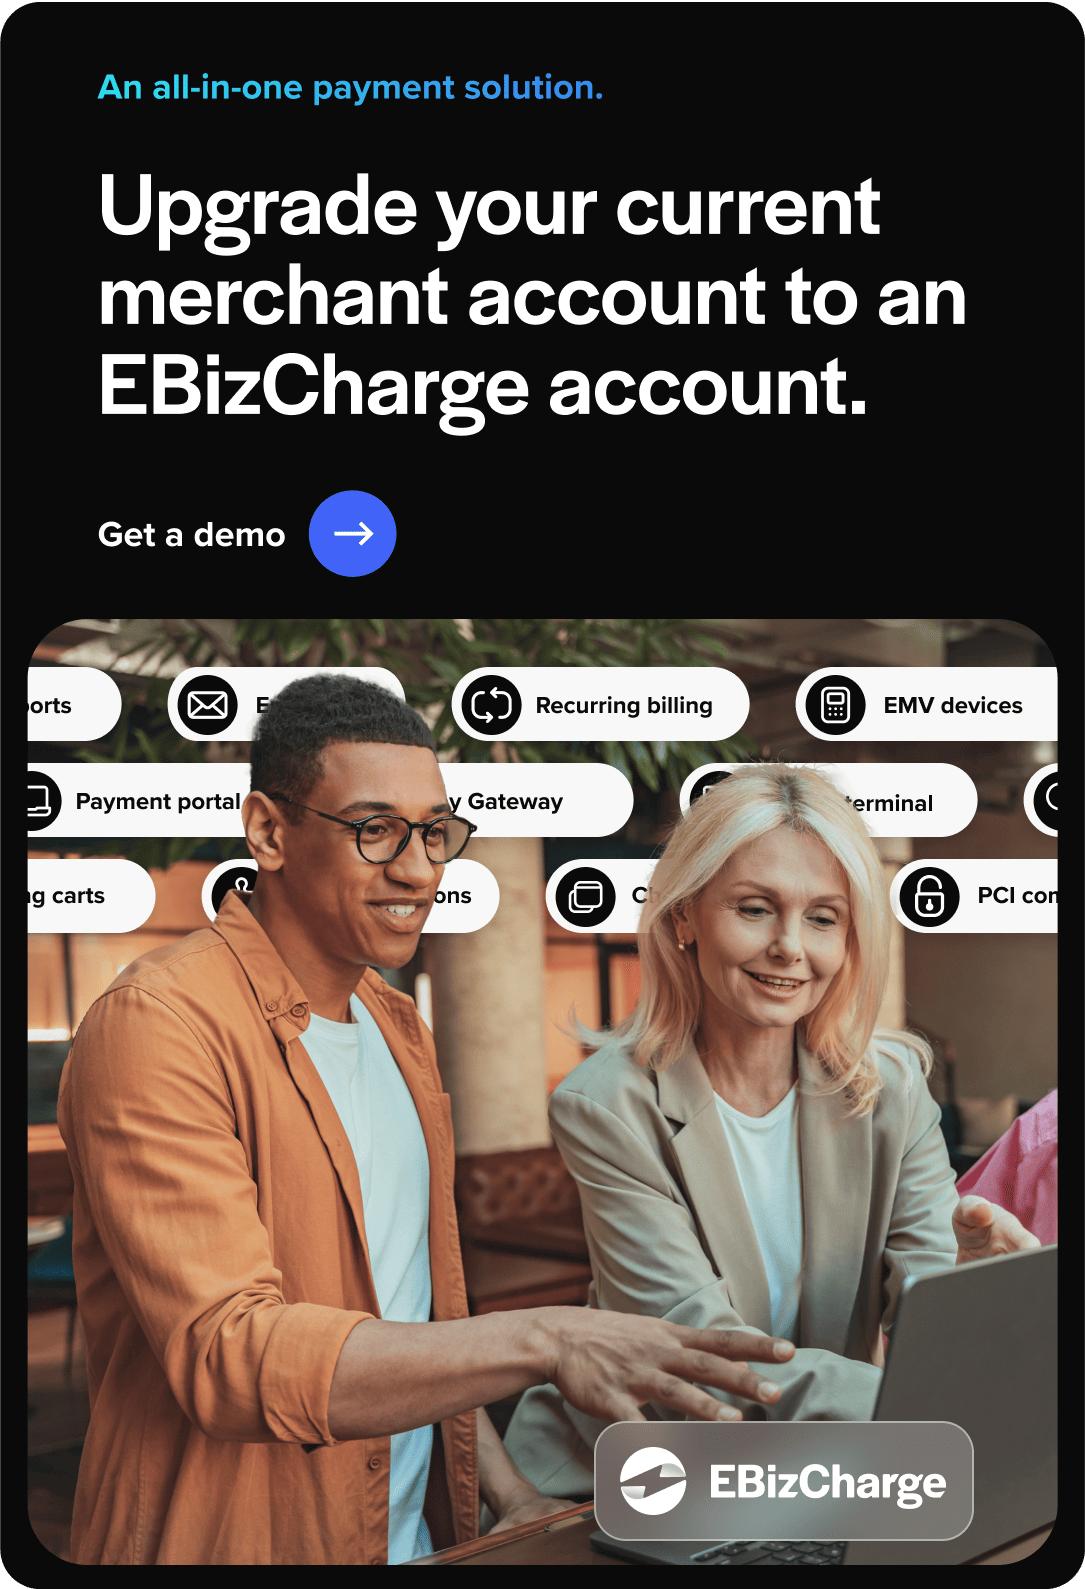 Upgrade to an EBizCharge Merchant account today